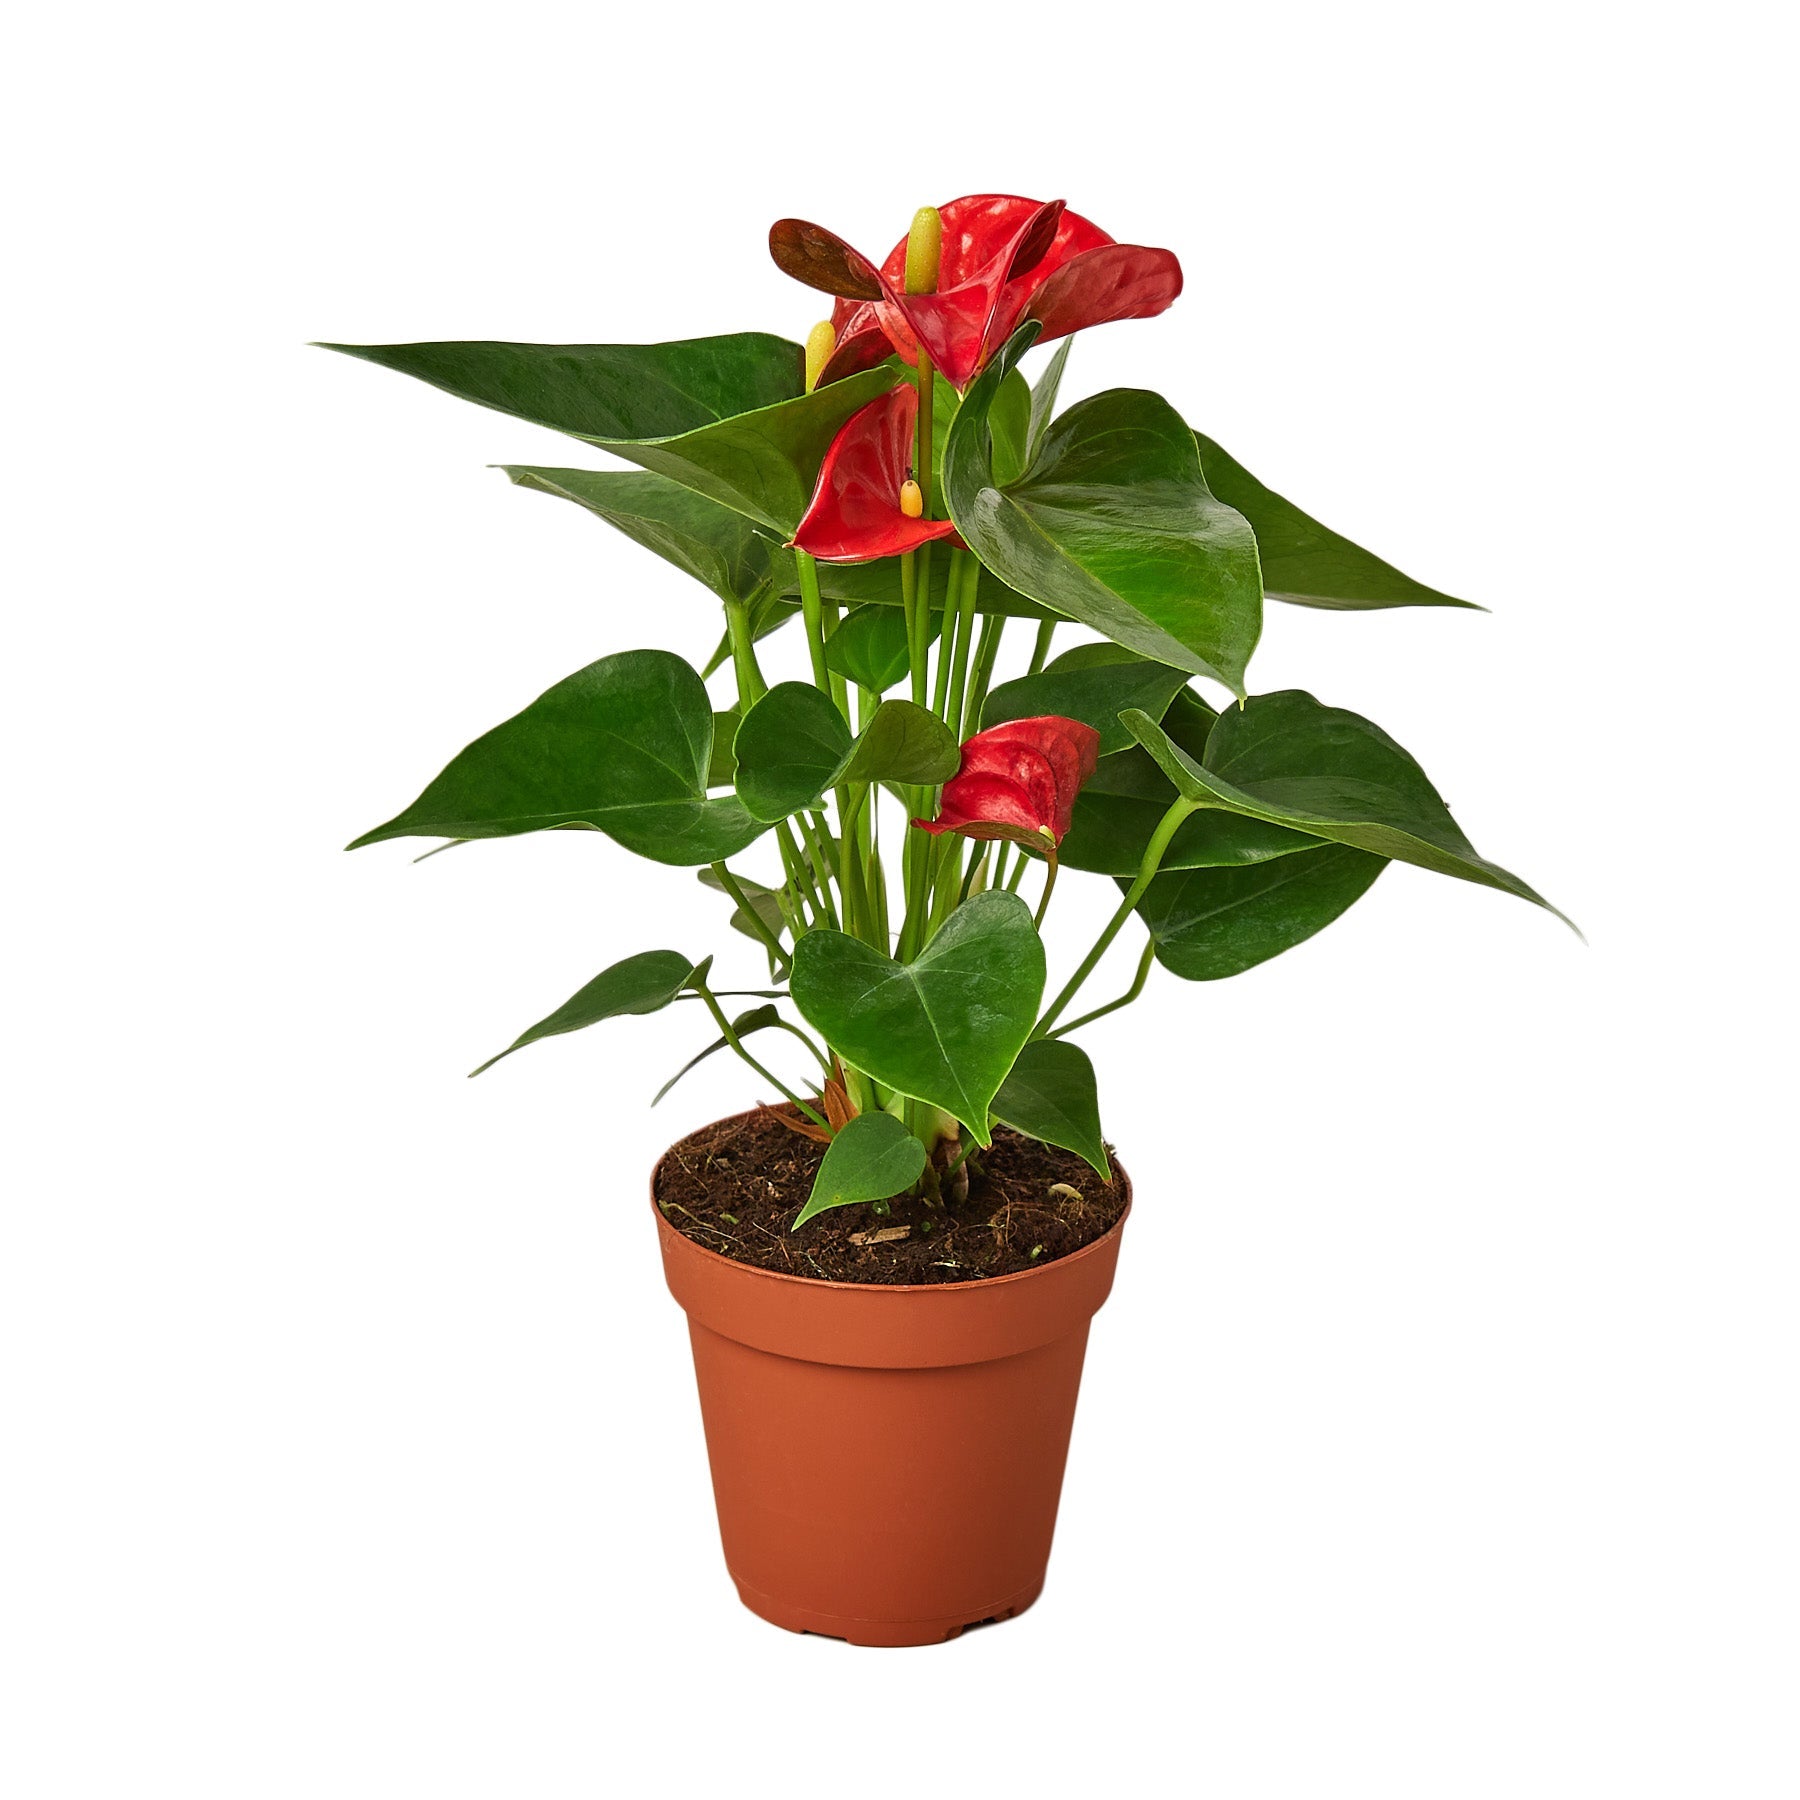 A vibrant red plant in a pot on a clean white background.